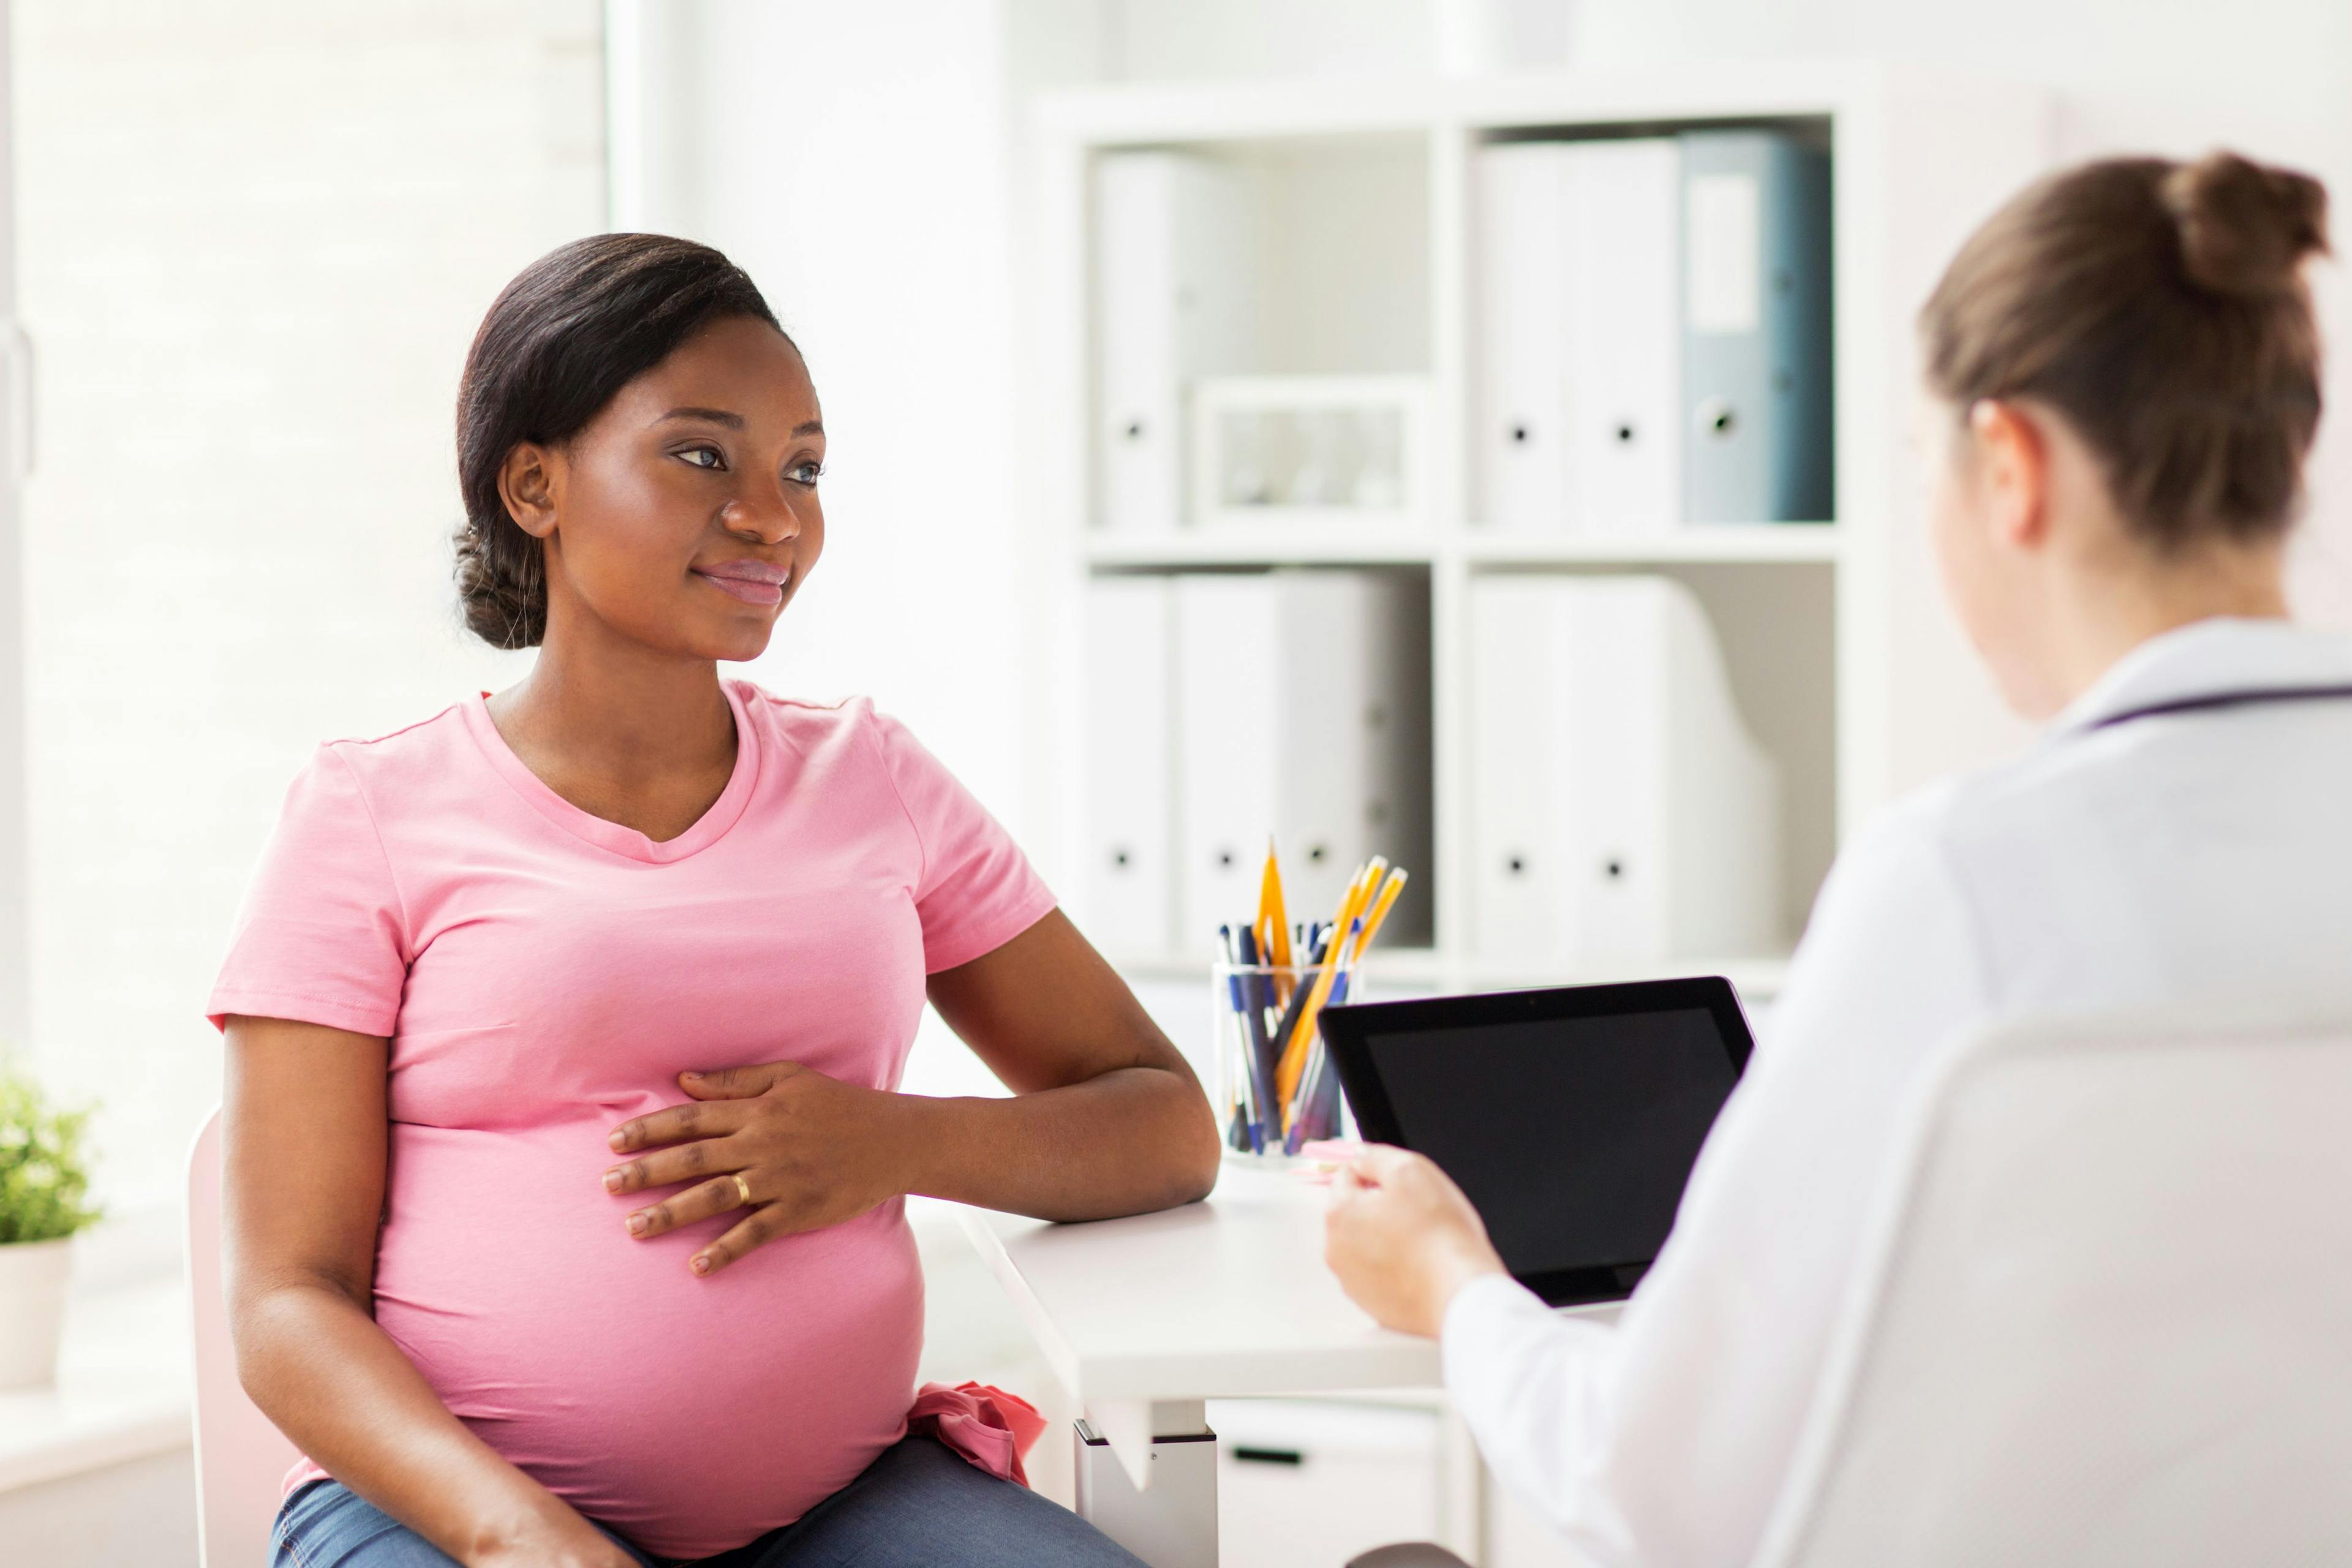 Pregnant Women With Lupus Benefit From Multidisciplinary Clinical Pathway